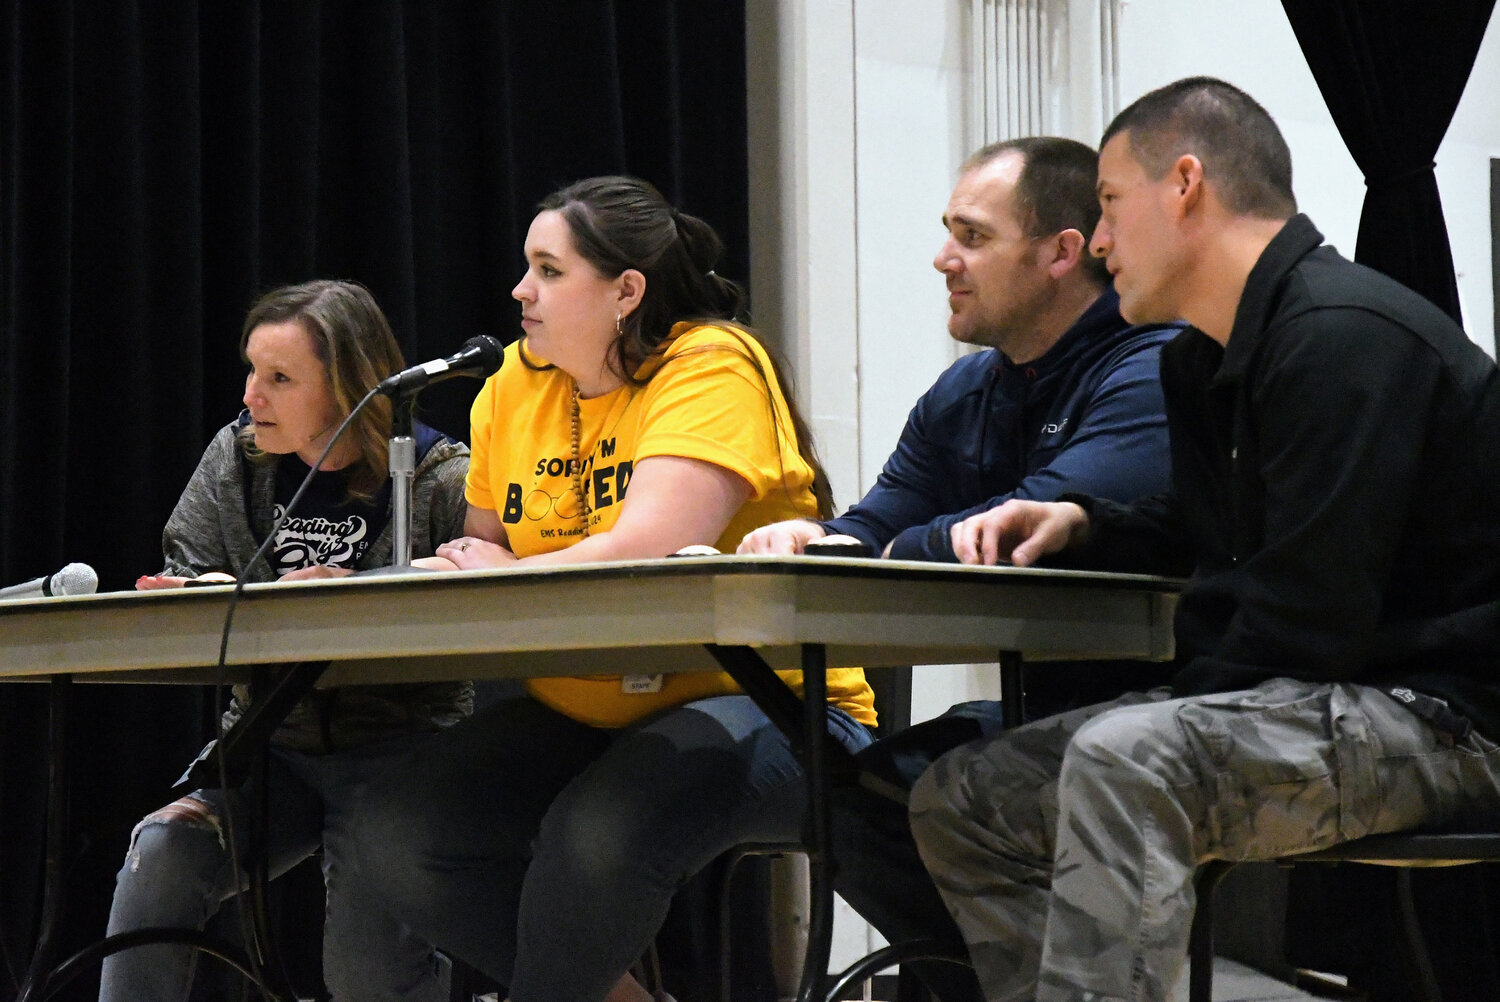 Jowell Deru, Kelsy Smith, Trevor Guild and Marquis Rennard made up the winning teachers’ team at this year’s Reading Rumble, though they didn’t fare well against the eighth-graders, who won the overall championship.